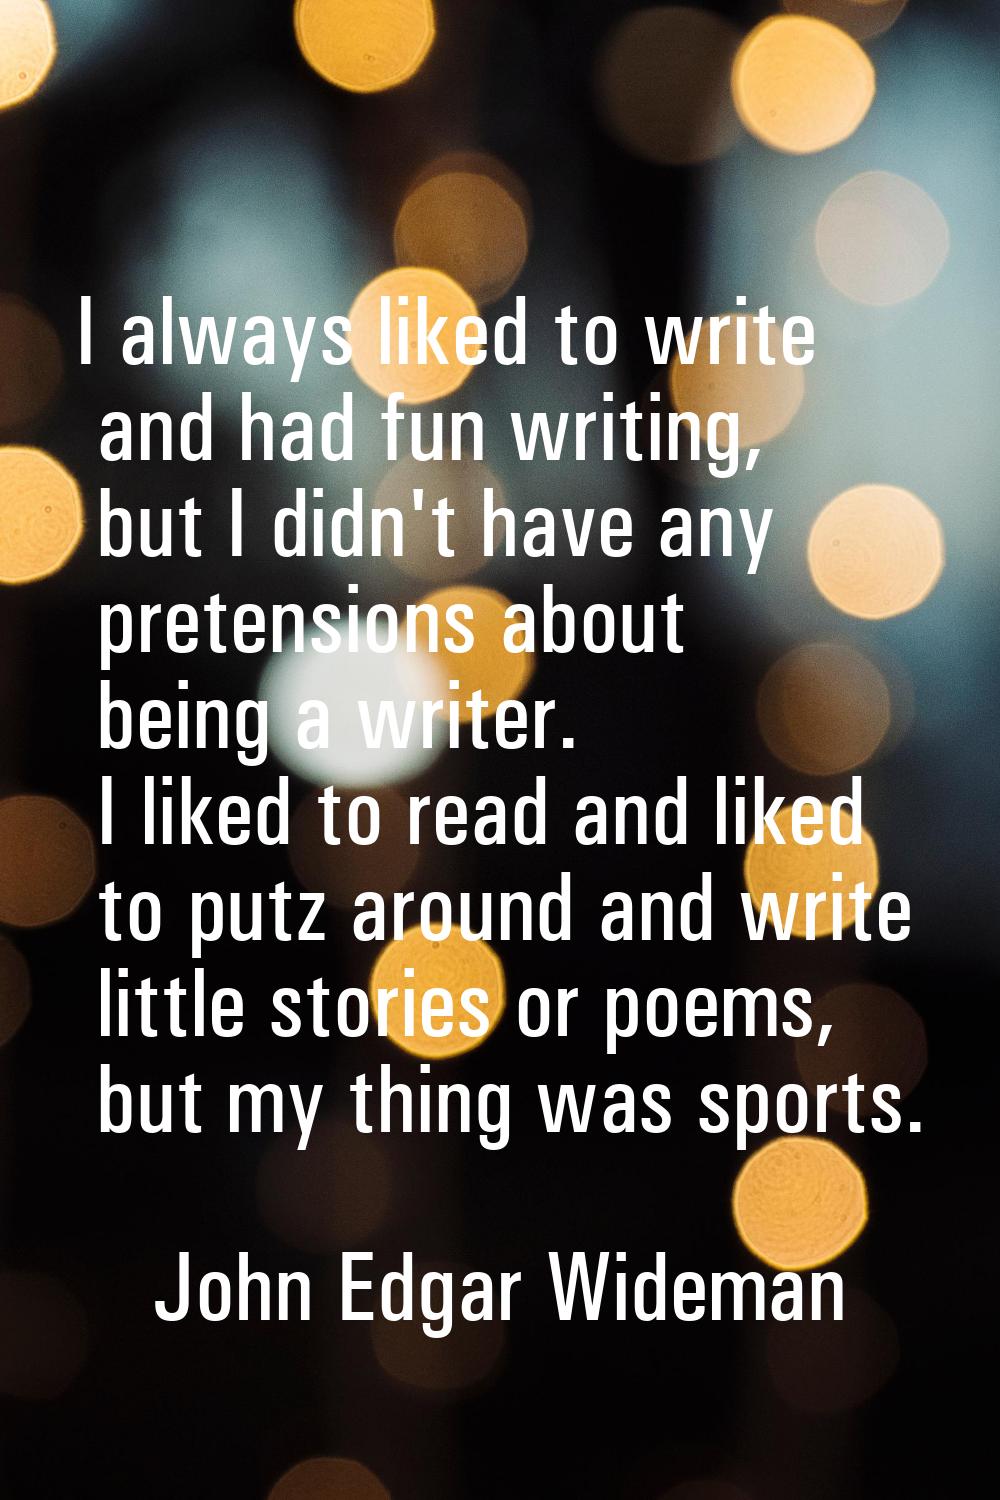 I always liked to write and had fun writing, but I didn't have any pretensions about being a writer